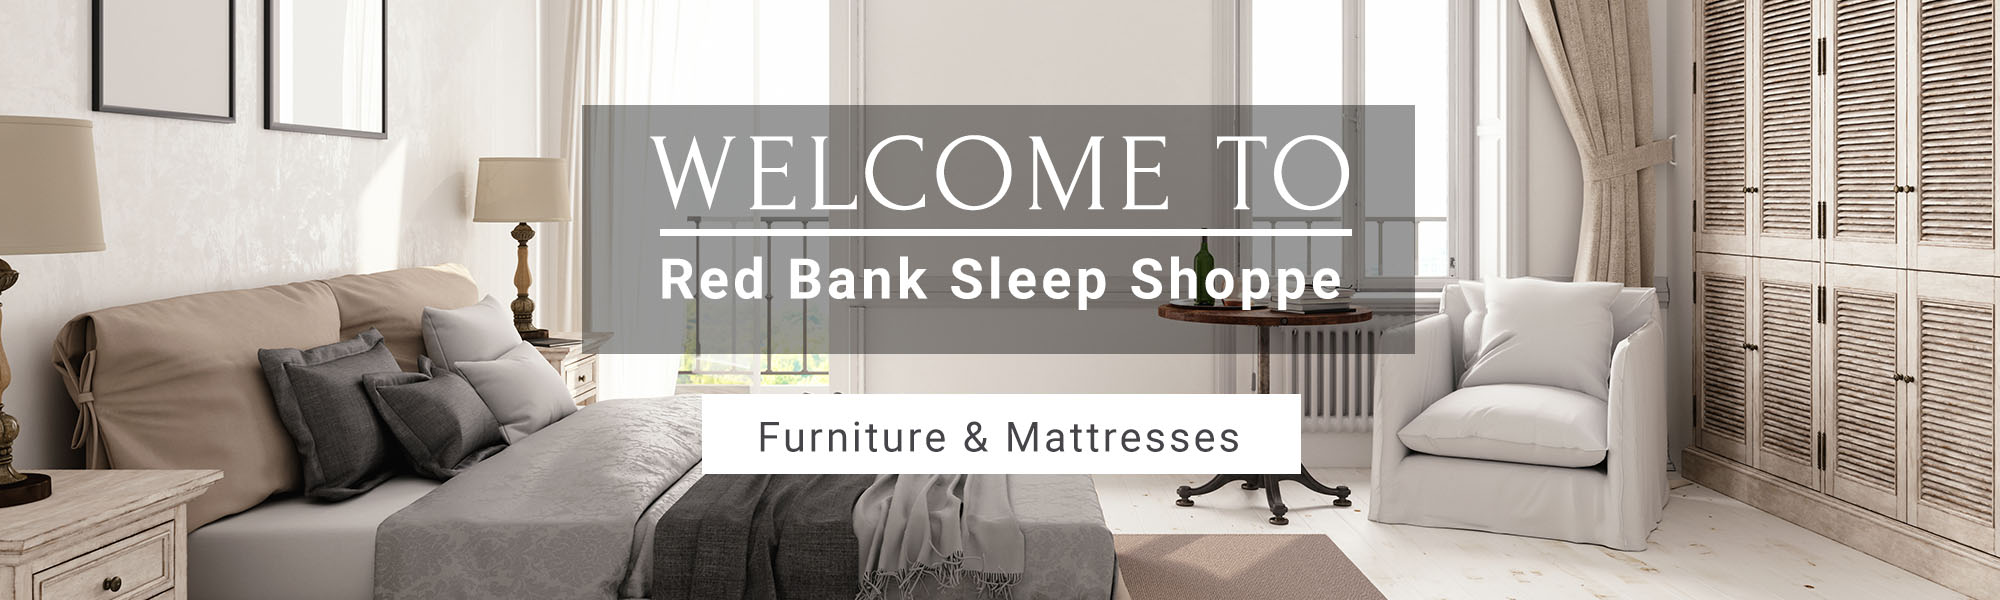 Mattresses And Furniture In Red Bank Nj Red Bank Sleep Shoppe